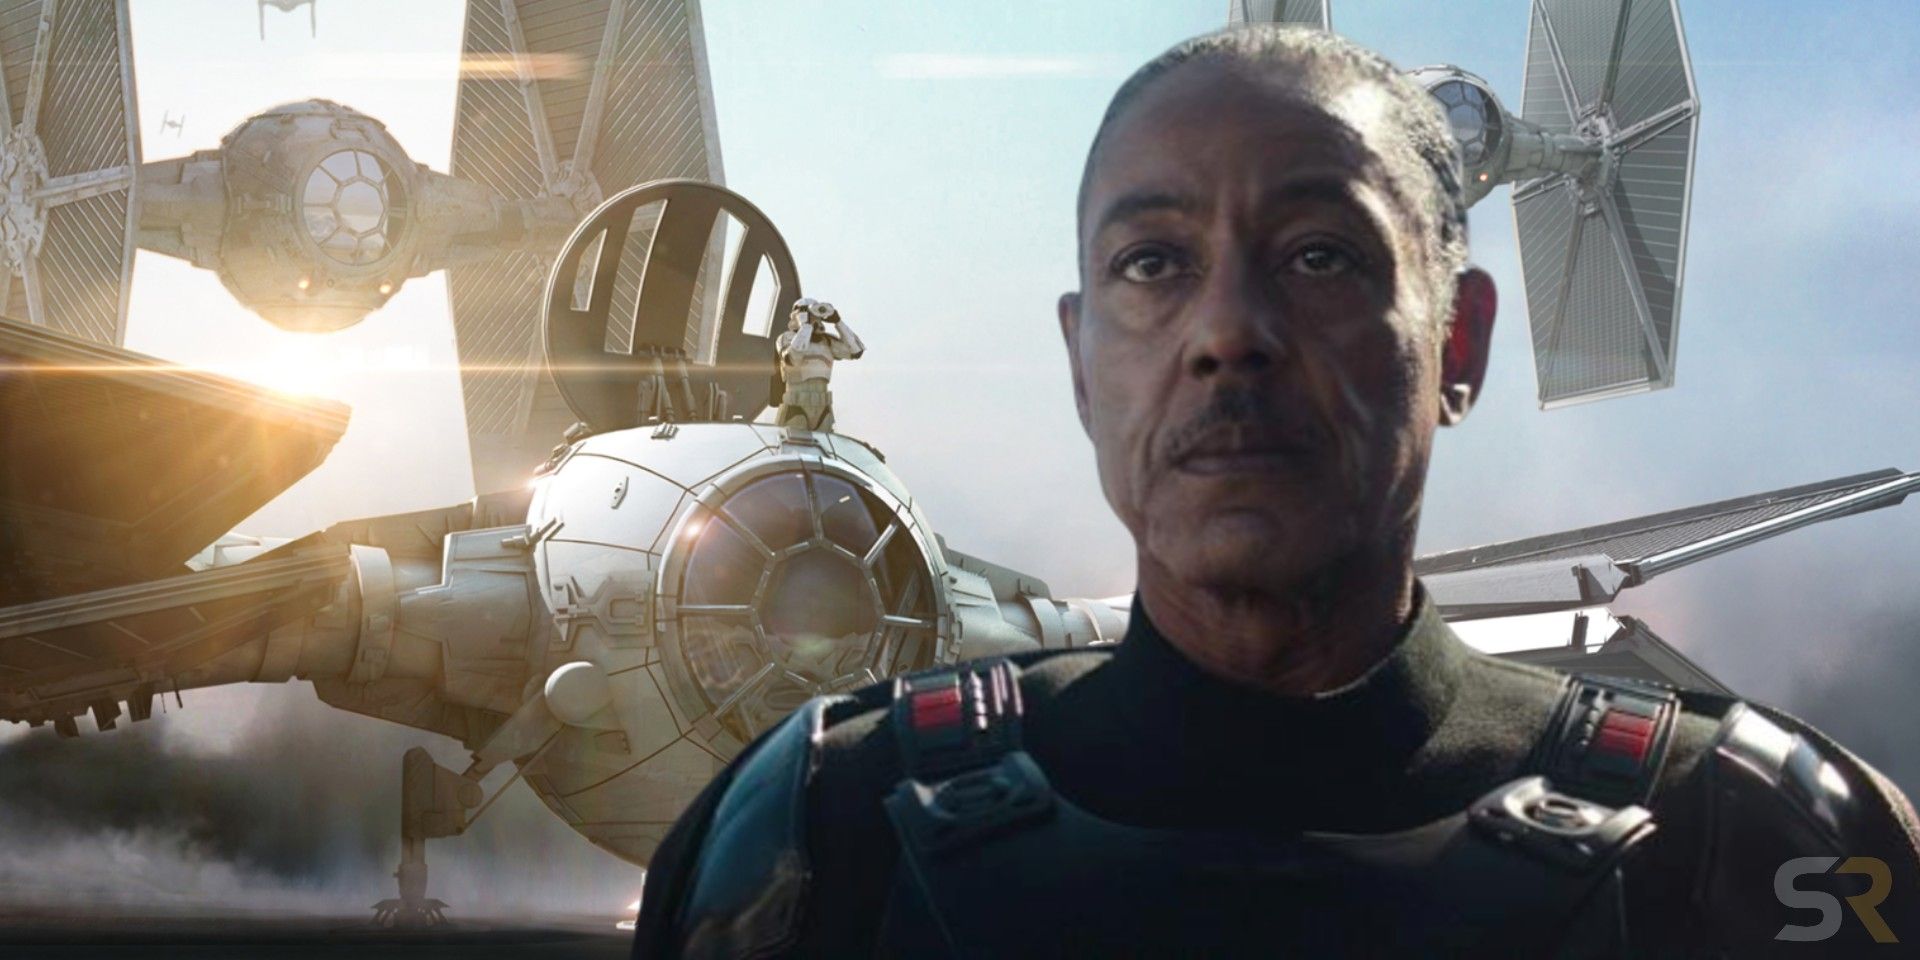 What To Expect From The Mandalorian Season 2